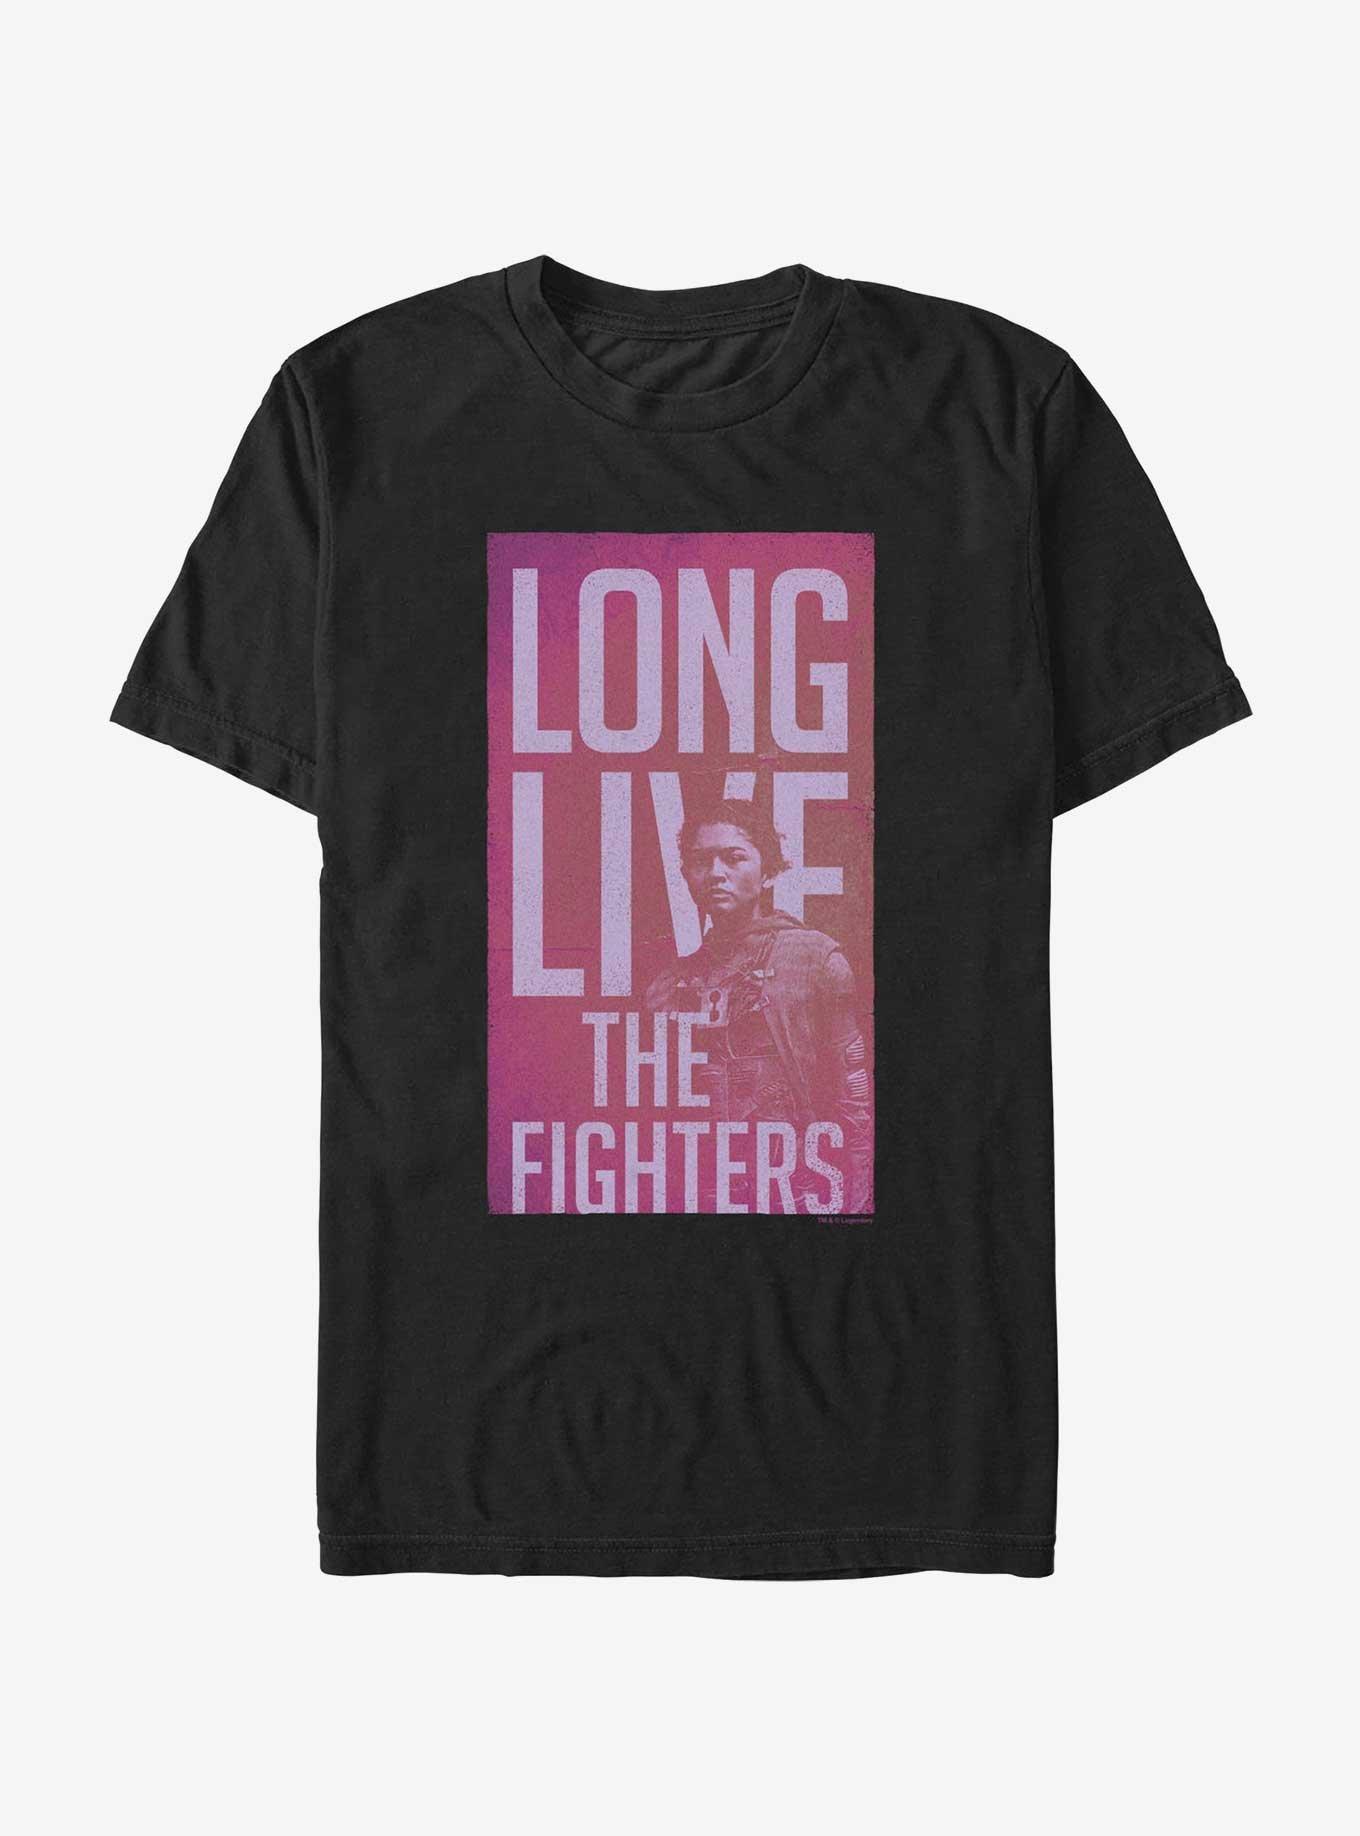 Dune: Part Two Long Live The Fighters Chani T-Shirt, BLACK, hi-res